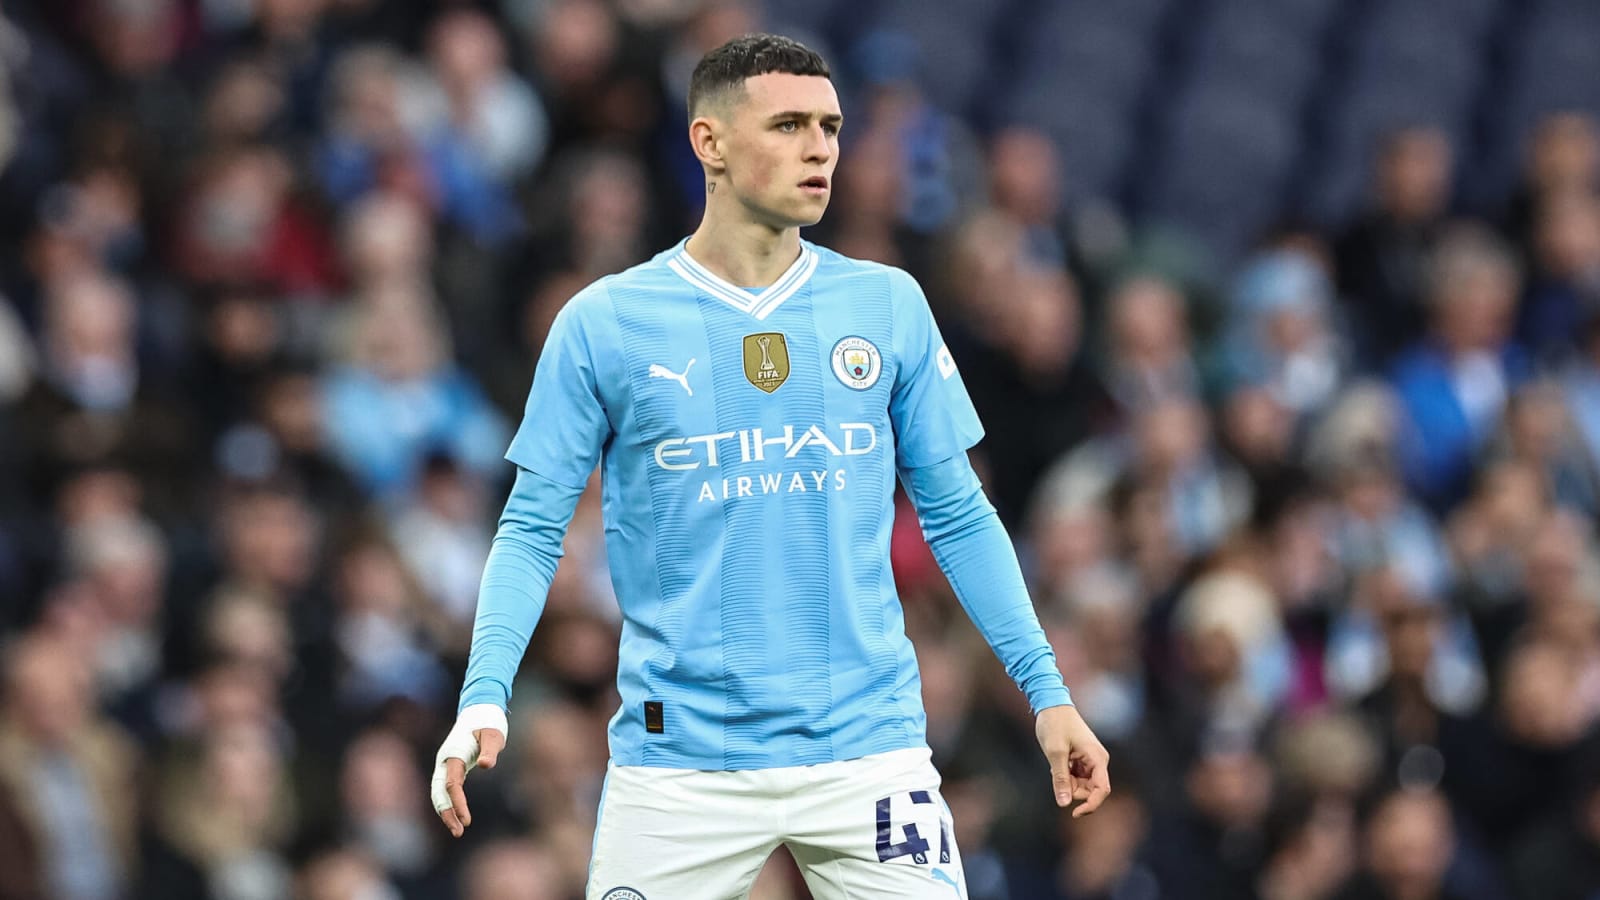 Will Phil Foden Shine Again? The Key Battles in Liverpool Vs Manchester City